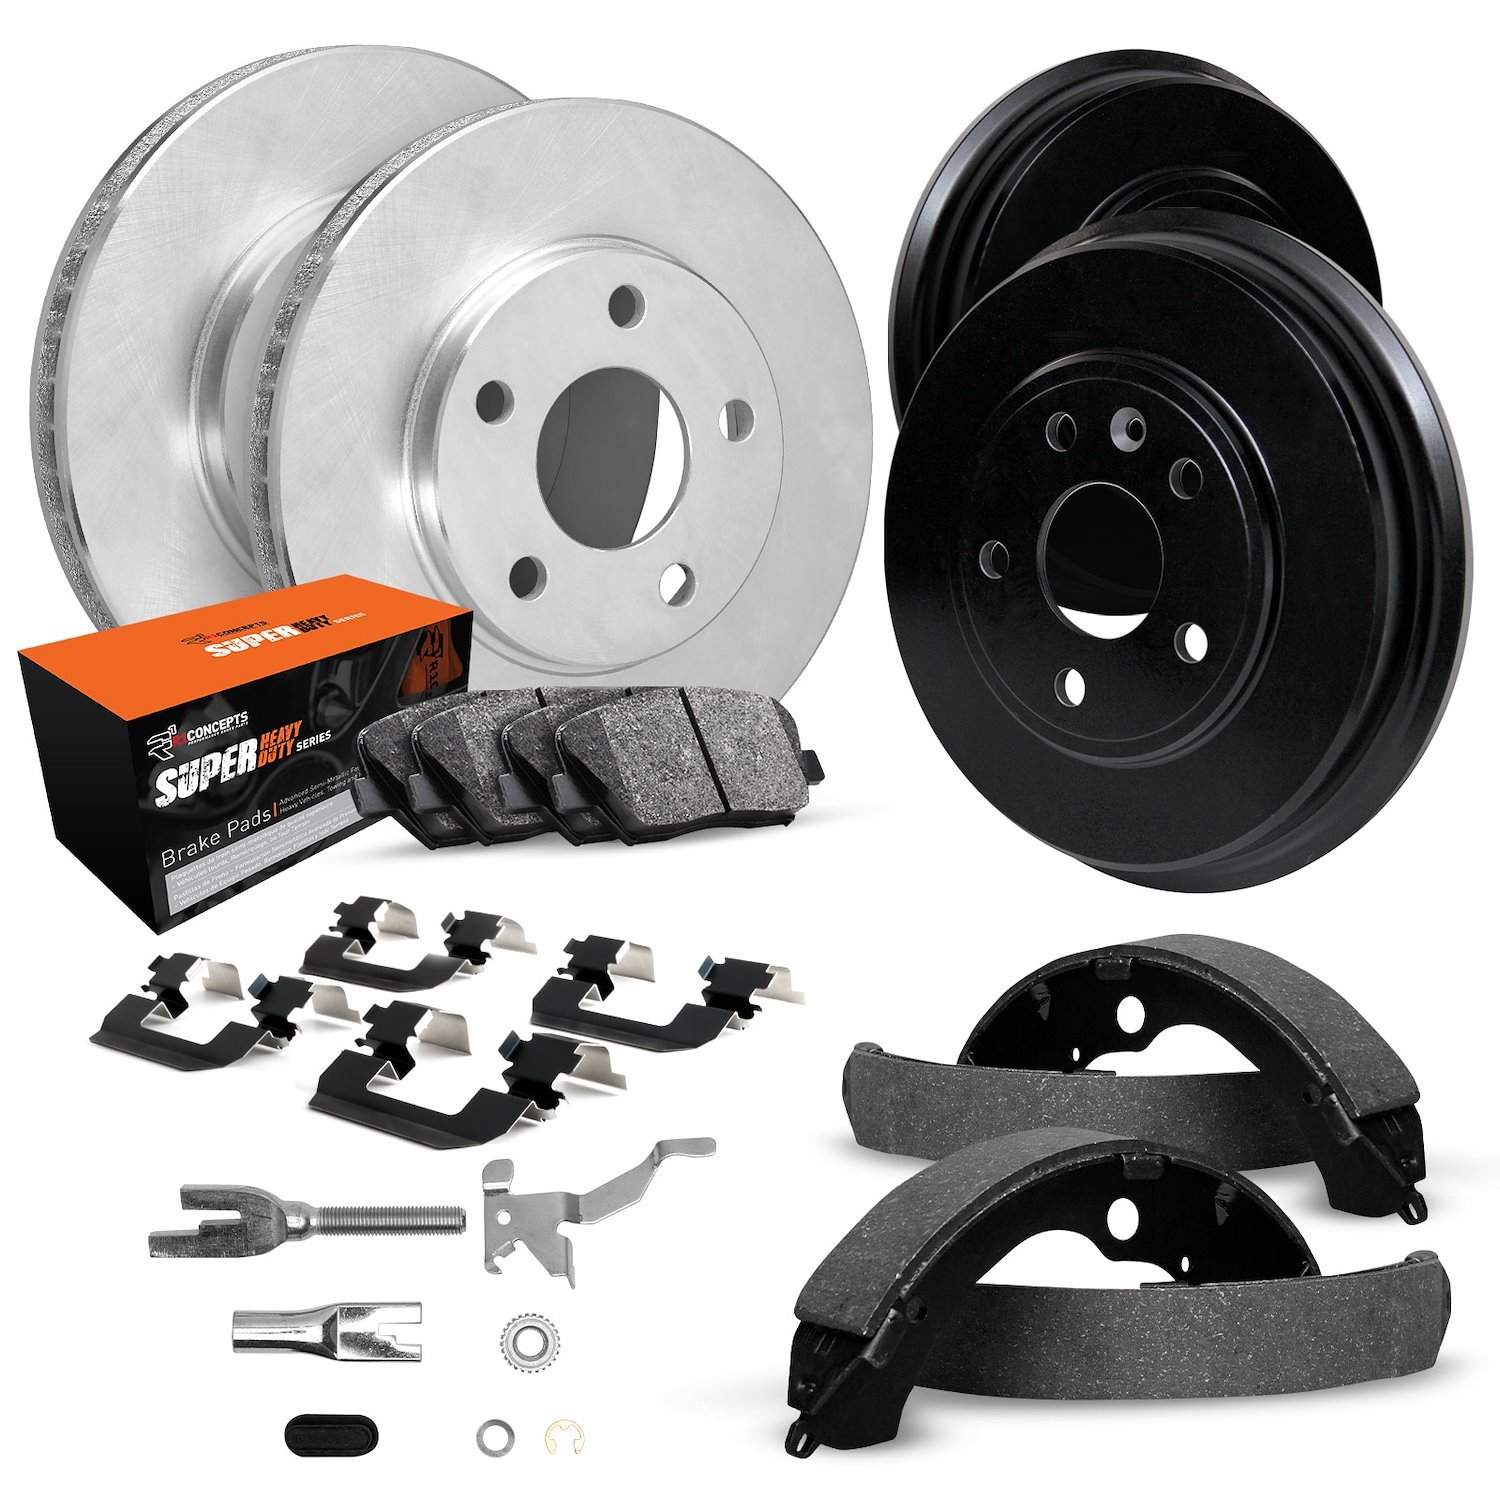 E-Line Blank Brake Rotor & Drum Set w/Super-Duty Pads, Shoes, Hardware, & Adjusters, 1999-2003 Ford/Lincoln/Mercury/Mazda